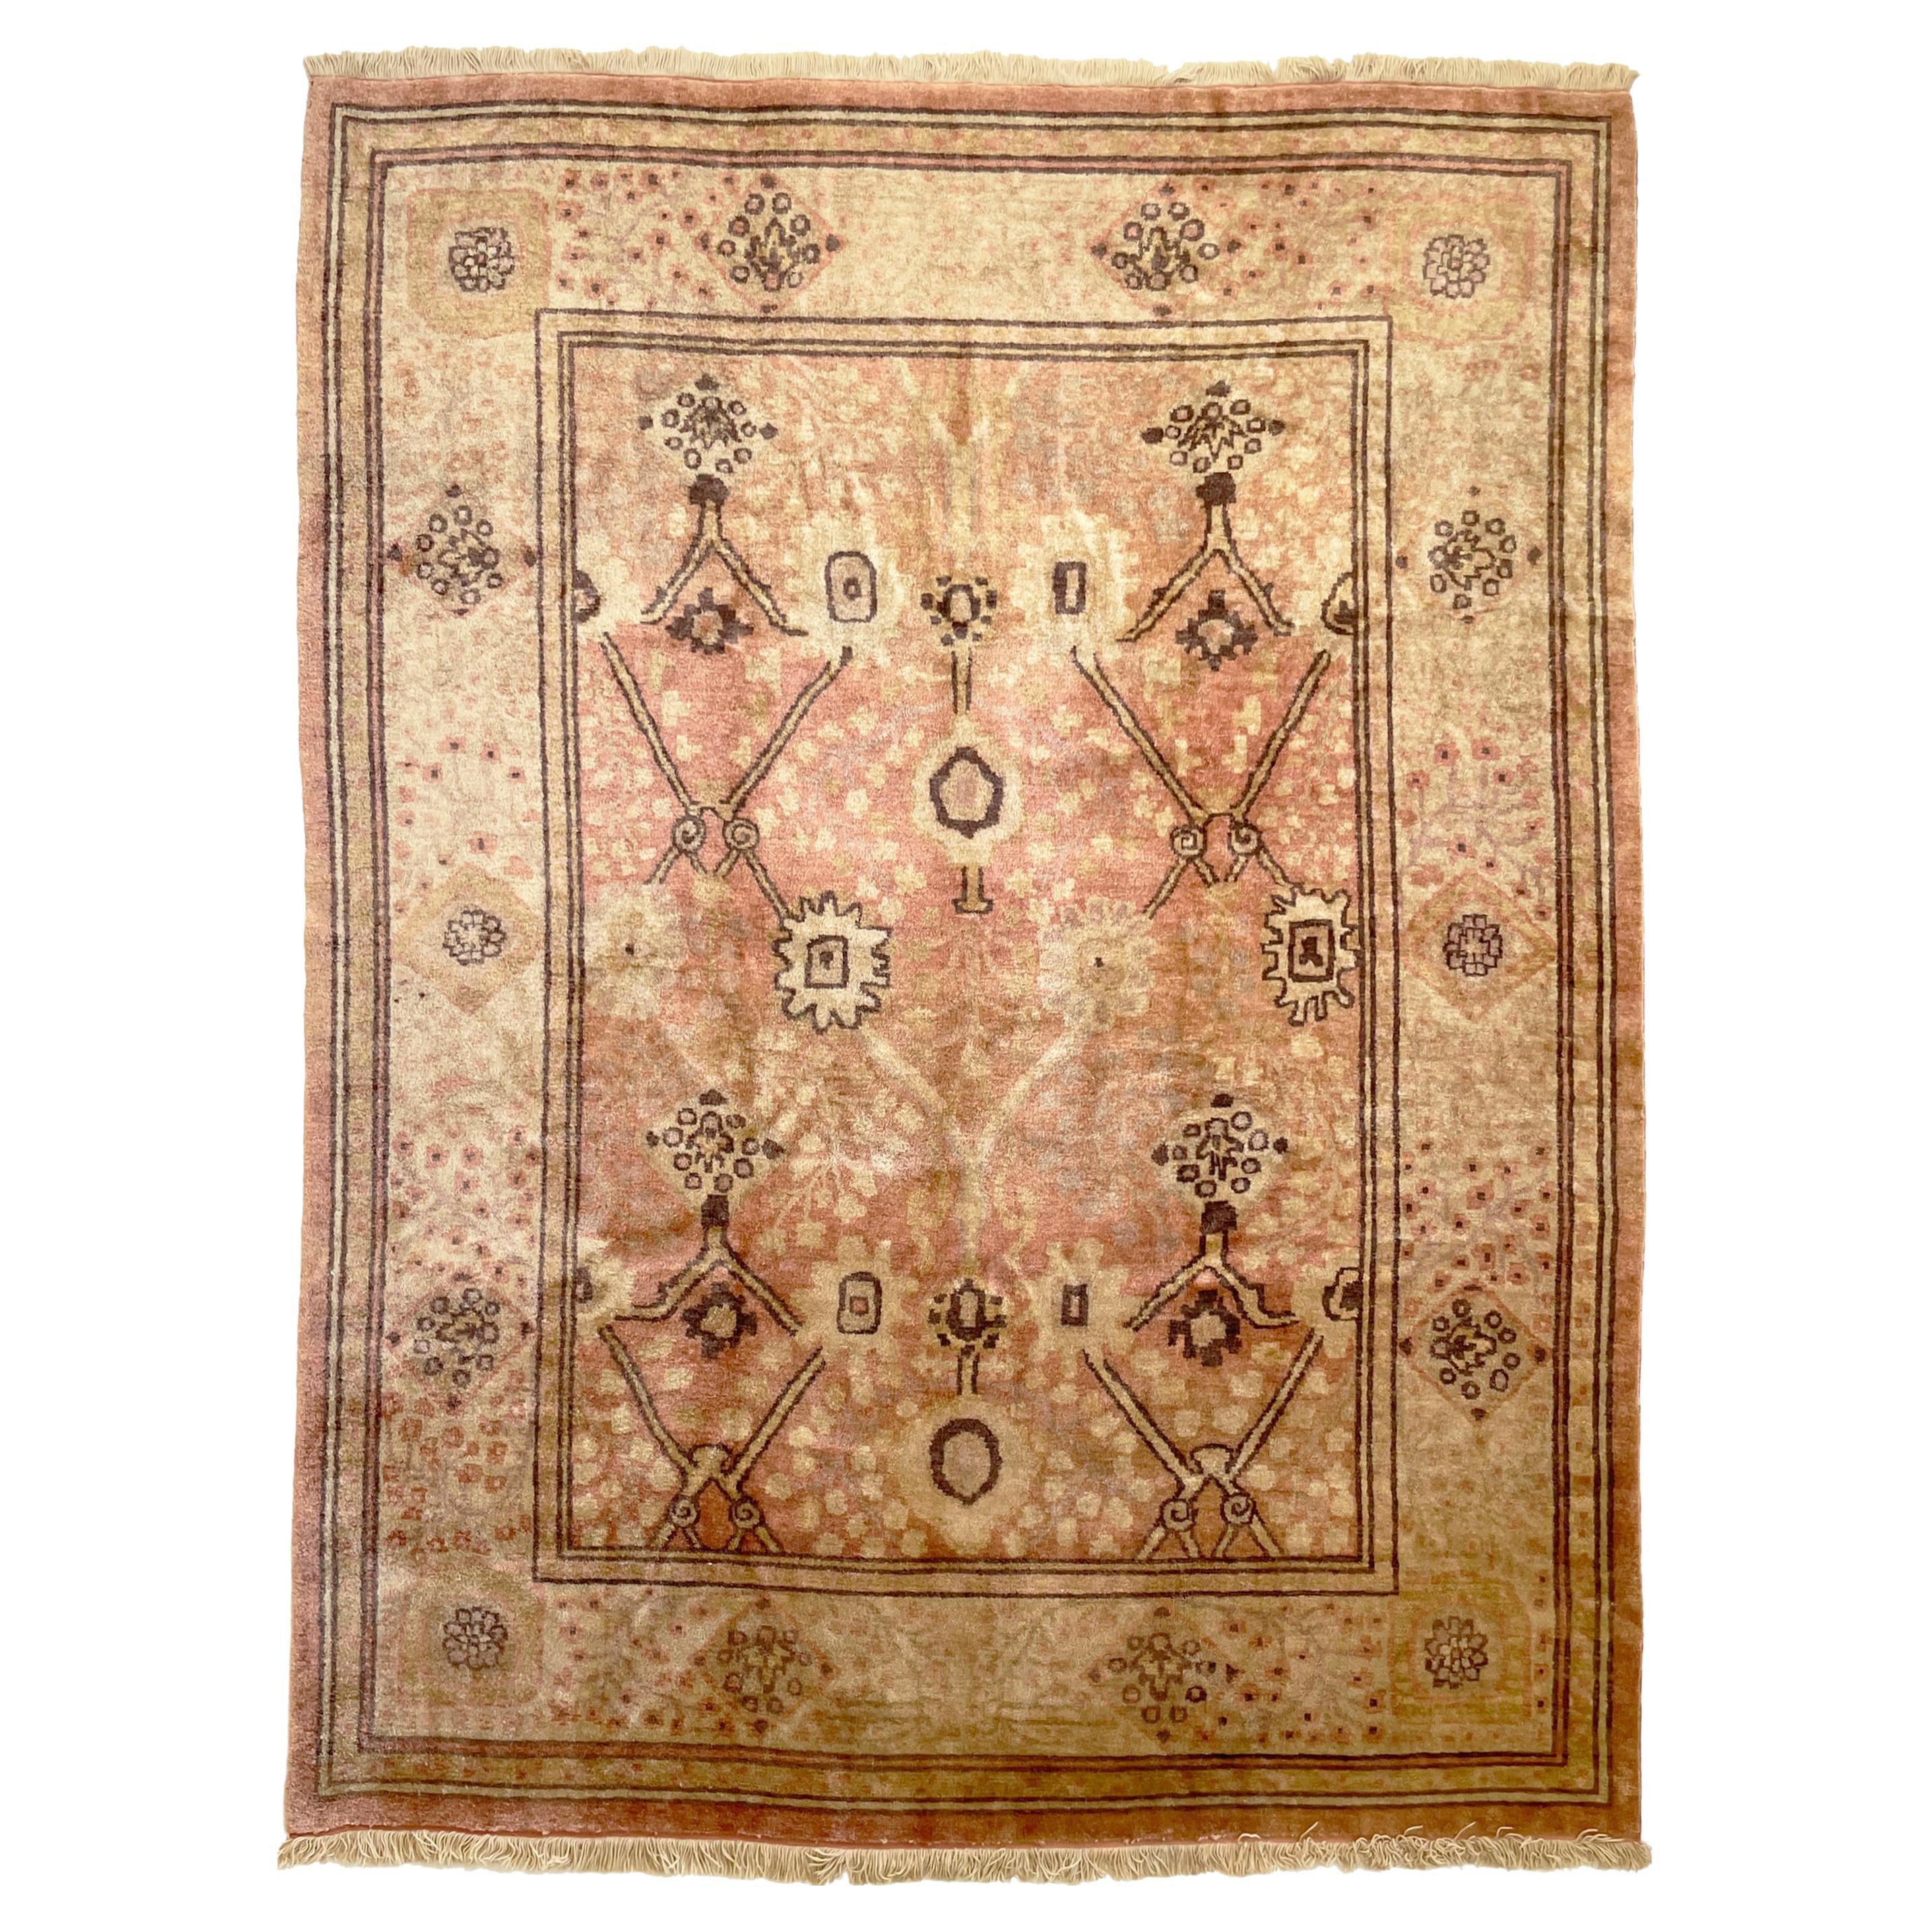 Ancient Glowing Vintage Oushak Rug with Glossy Plush Wool, circa 1950-60's For Sale